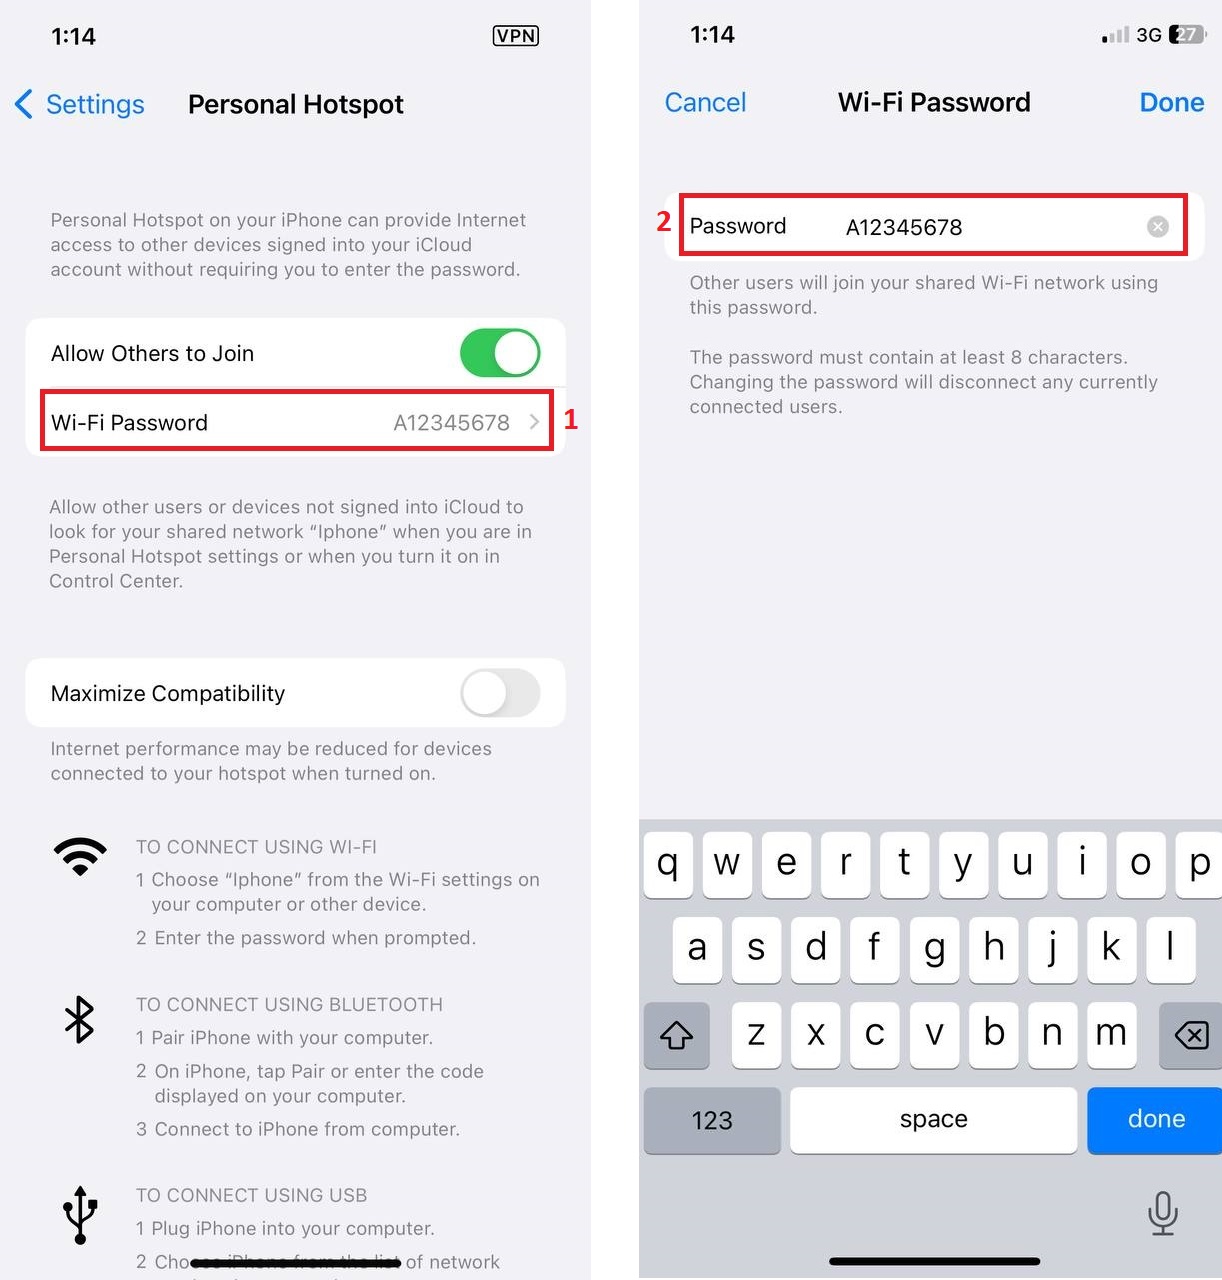 Wi-Fi hotspot settings with personal hotspot enabled and a password assigned, emphasizing security measures.